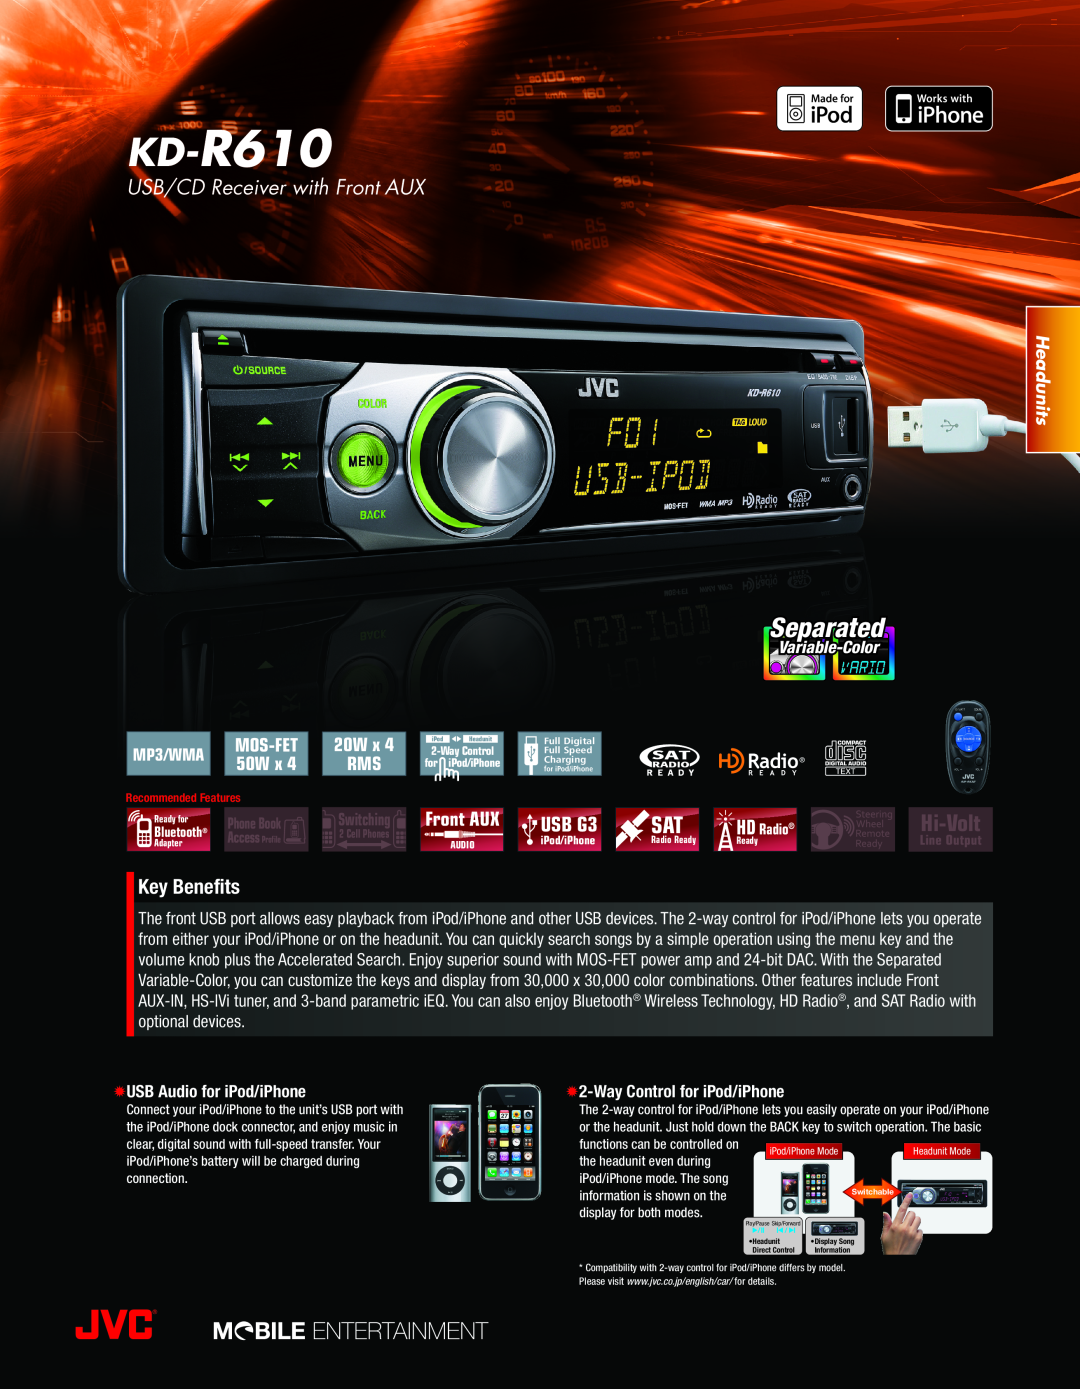 JVC KD-R610 manual USB/CD Receiver with Front AUX, Variable-Color, USB Audio for iPod/iPhone, Way Control for iPod/iPhone 